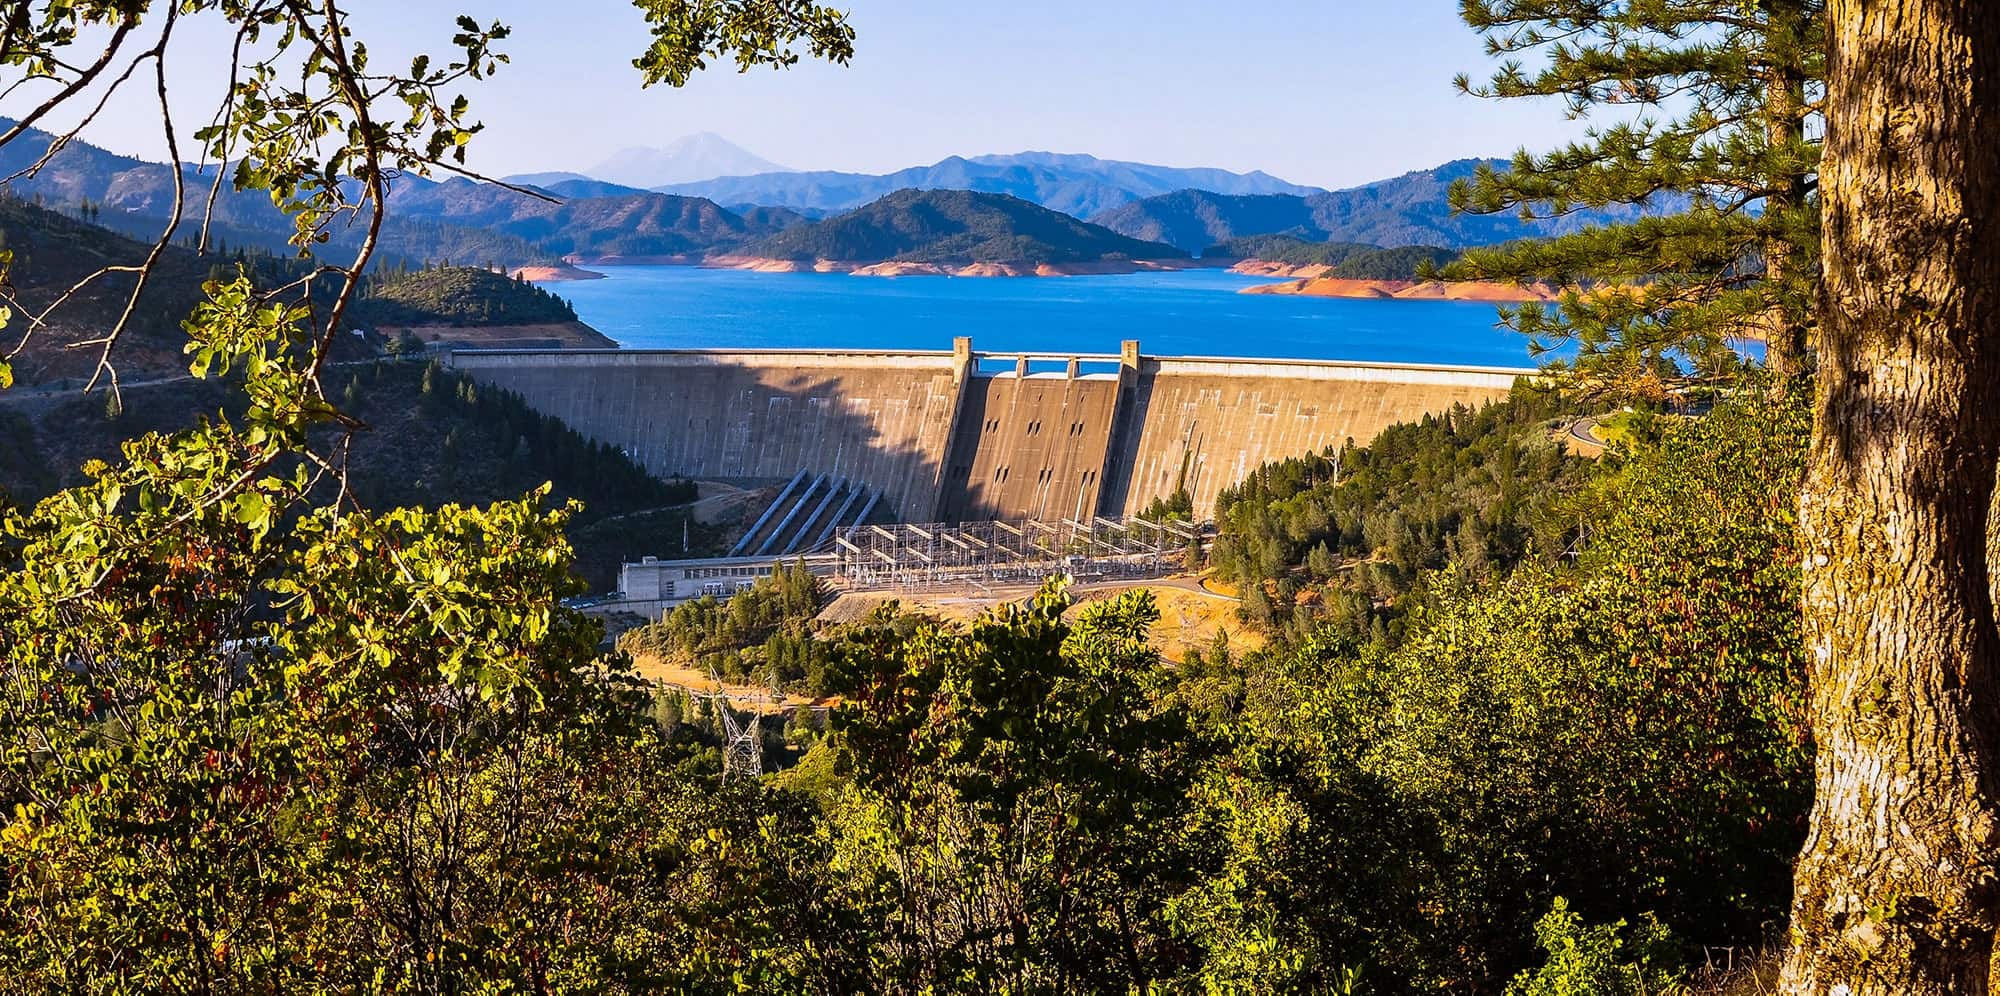 Image of Shasta Lake dam from a distance.